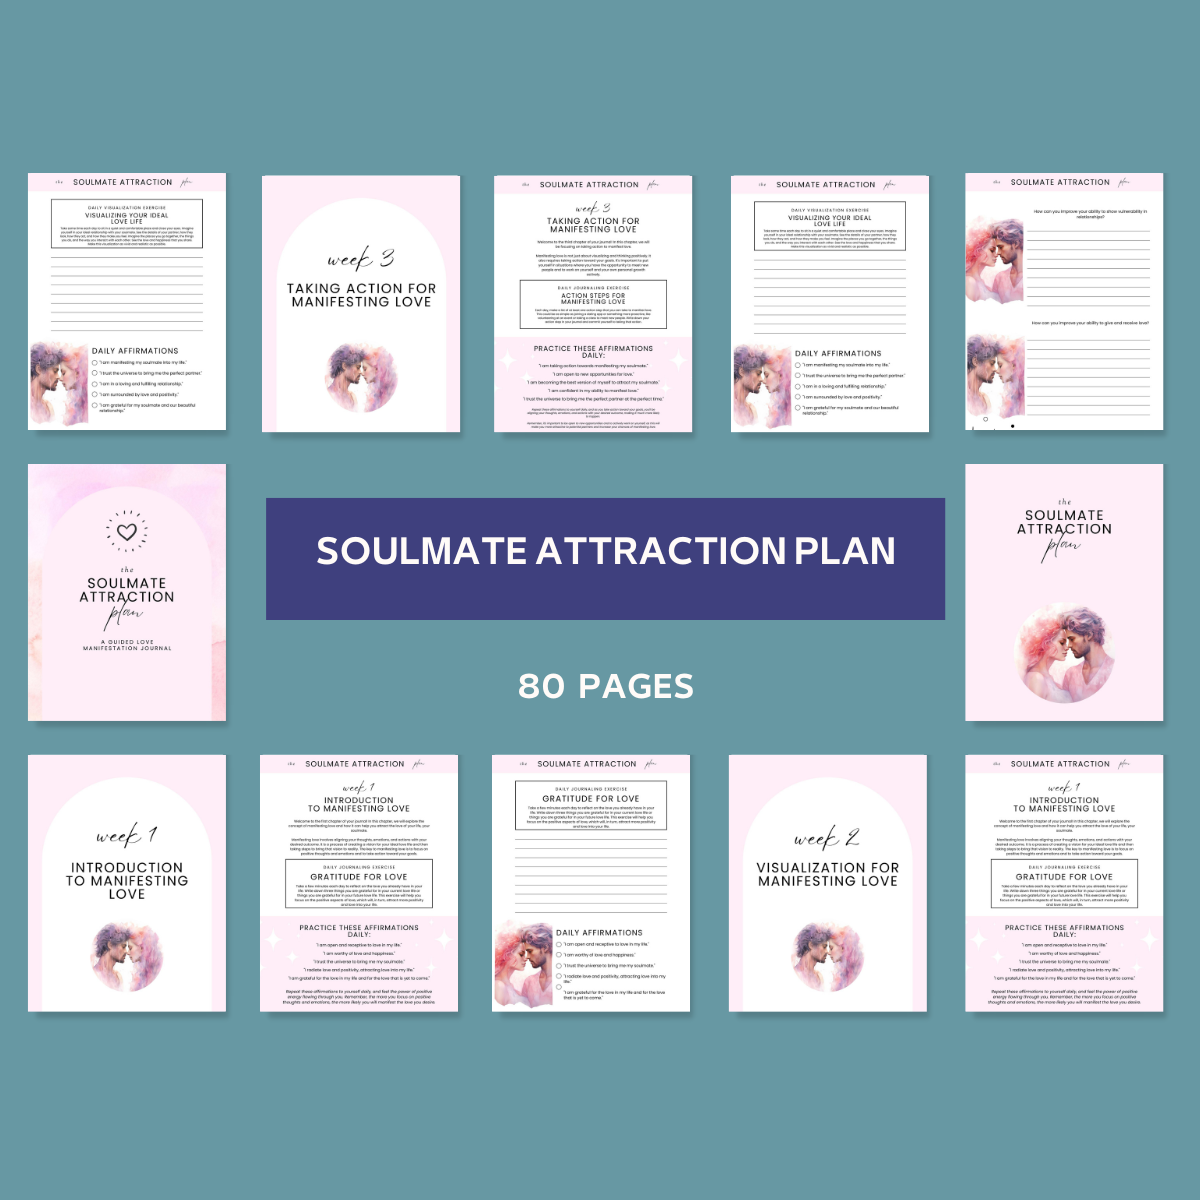 Soulmate Attraction Plan